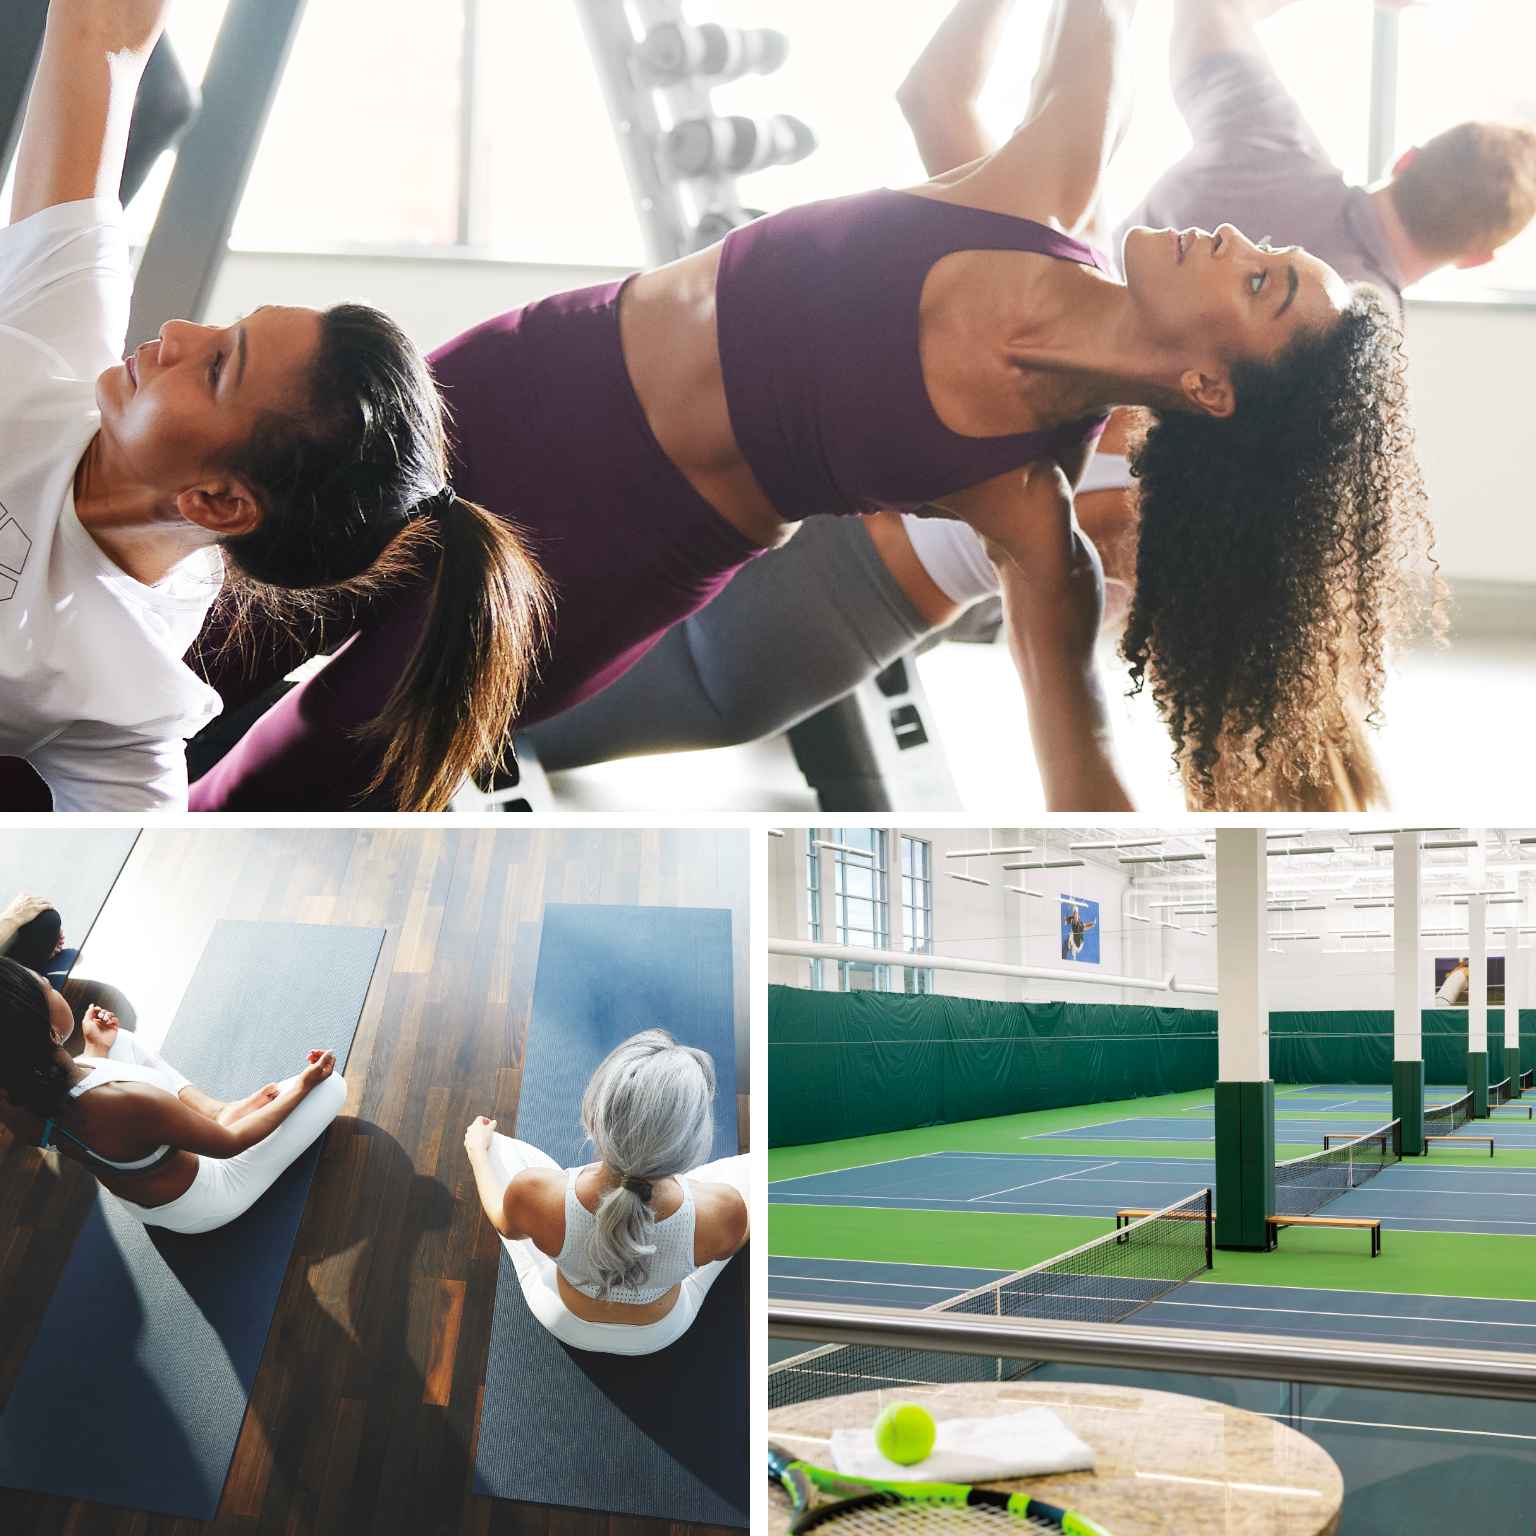 Collage including three images. A group training class doing side planks. A group of women sitting on yoga mats in a yoga studio. A table overlooking multiple indoor tennis courts.